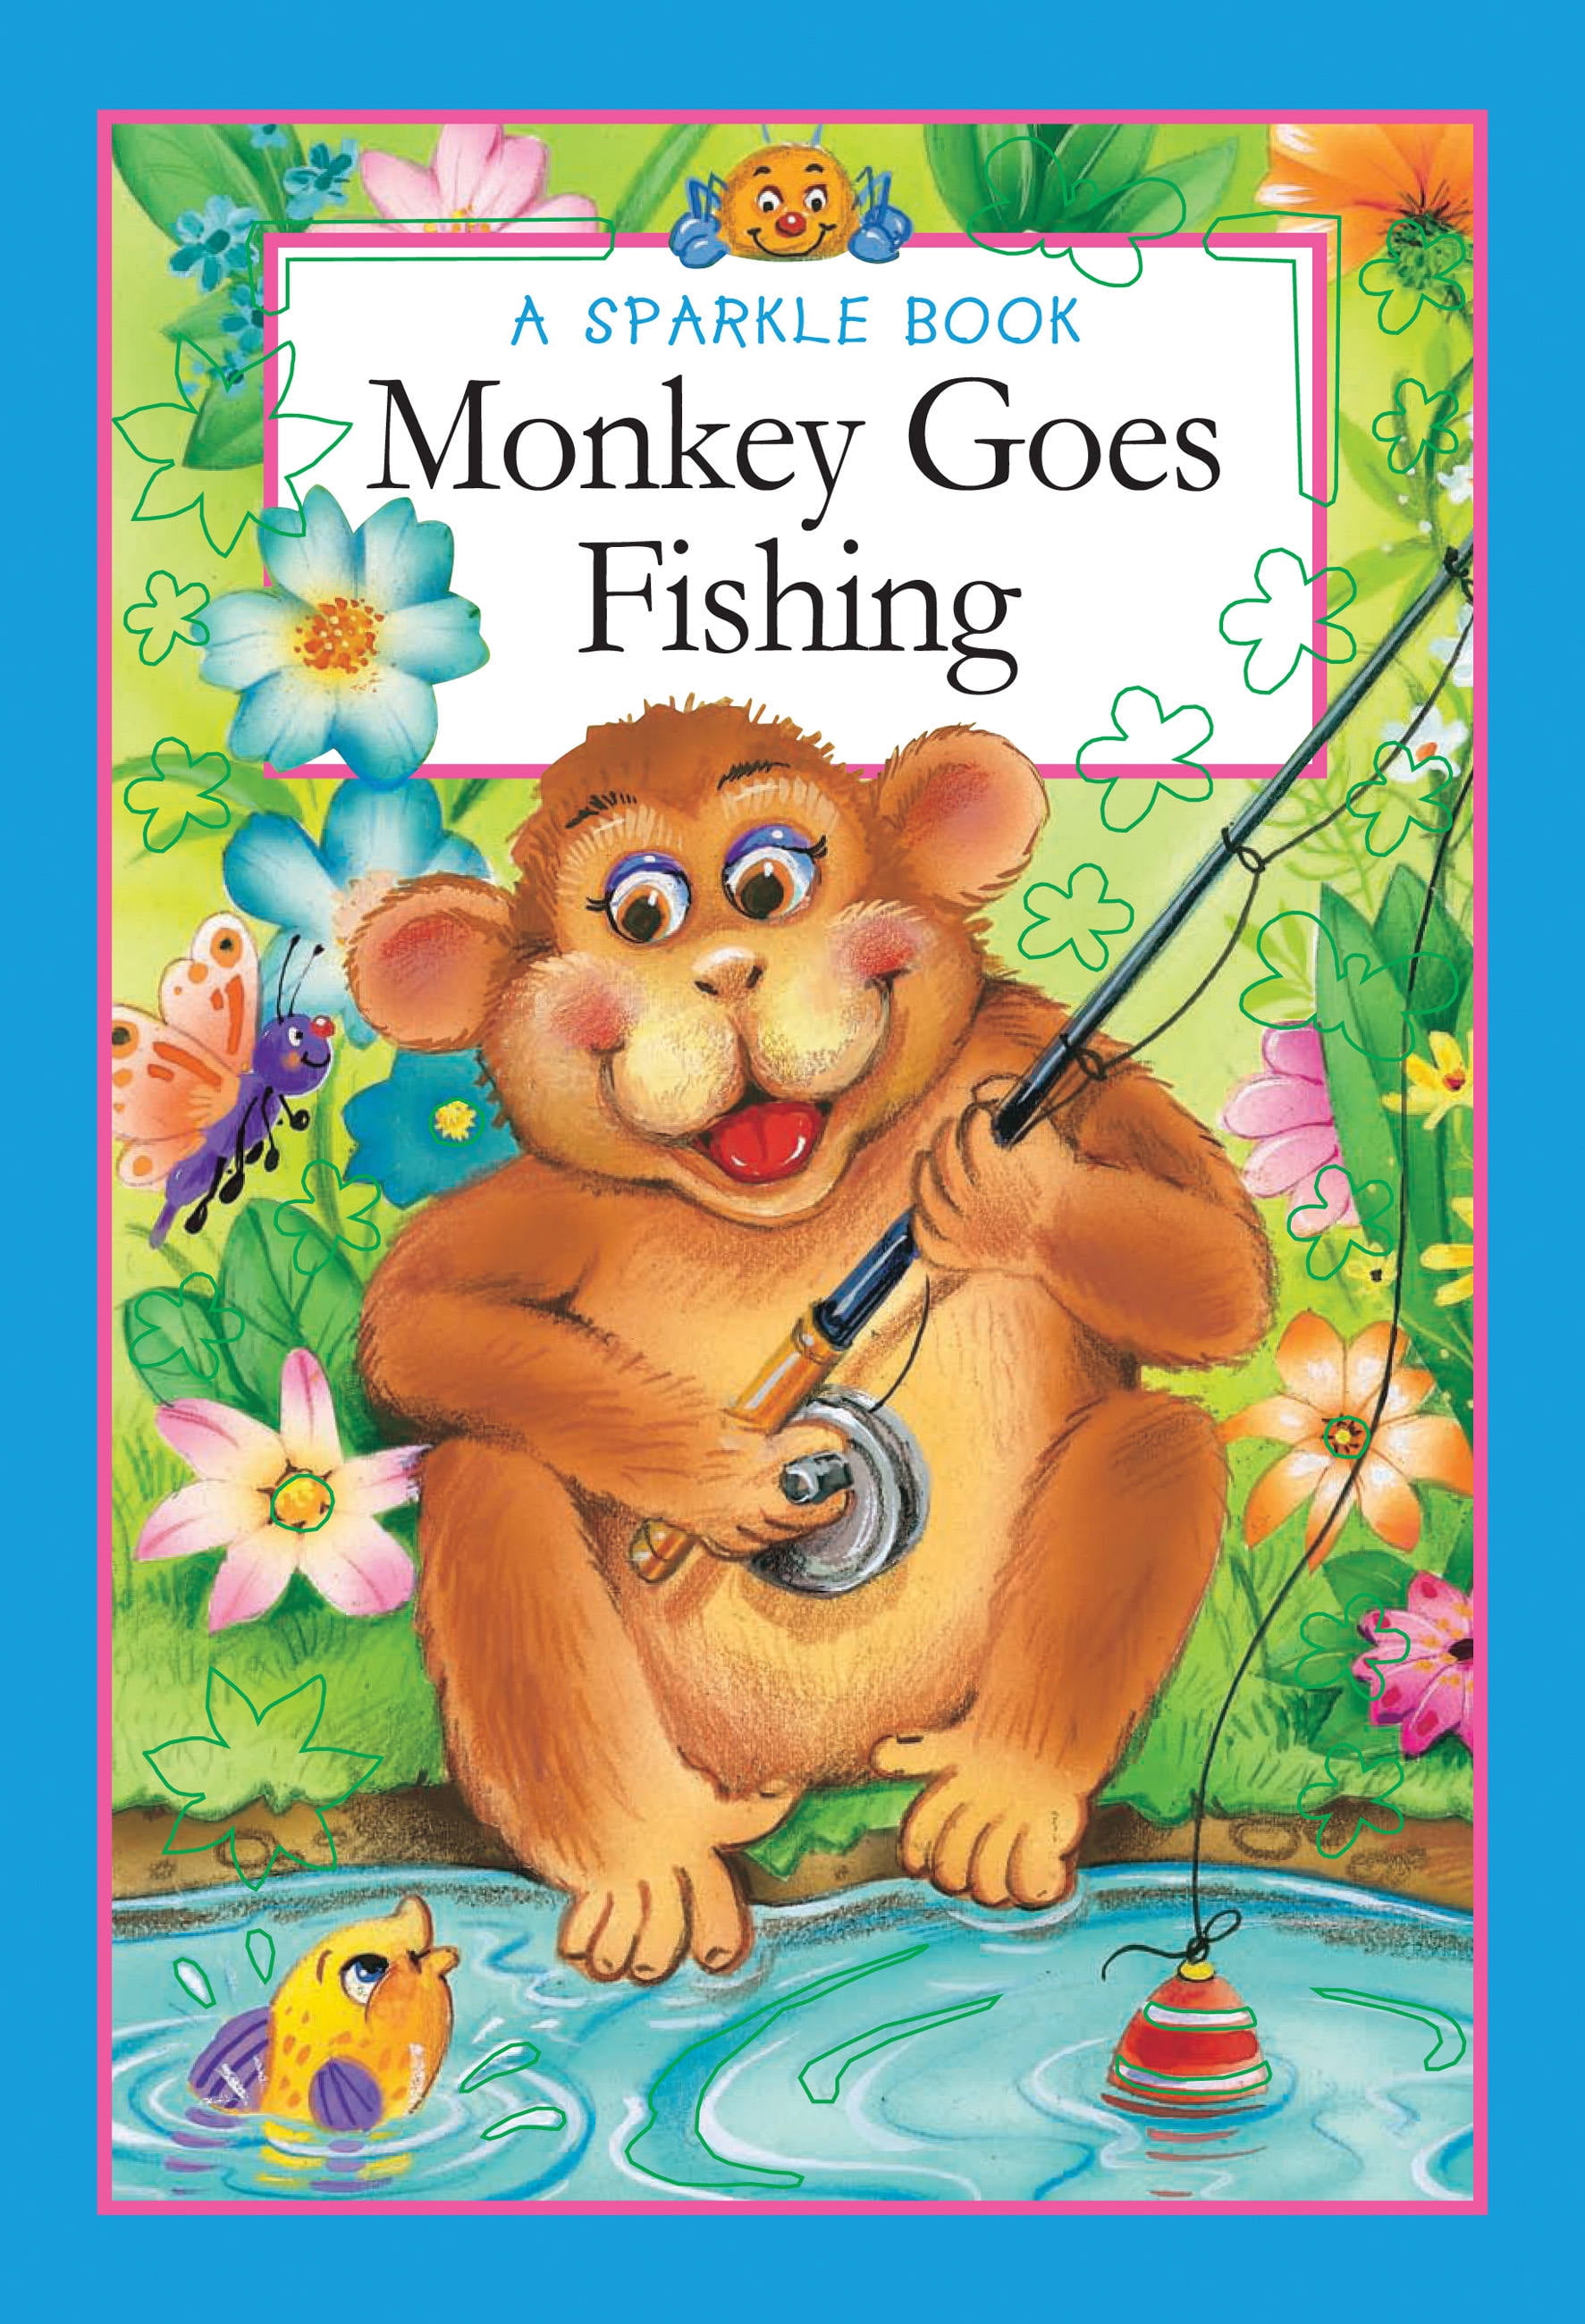 Sparkle Books: A Sparkle Book: Monkey Goes Fishing (Edition 1) (Hardcover)  